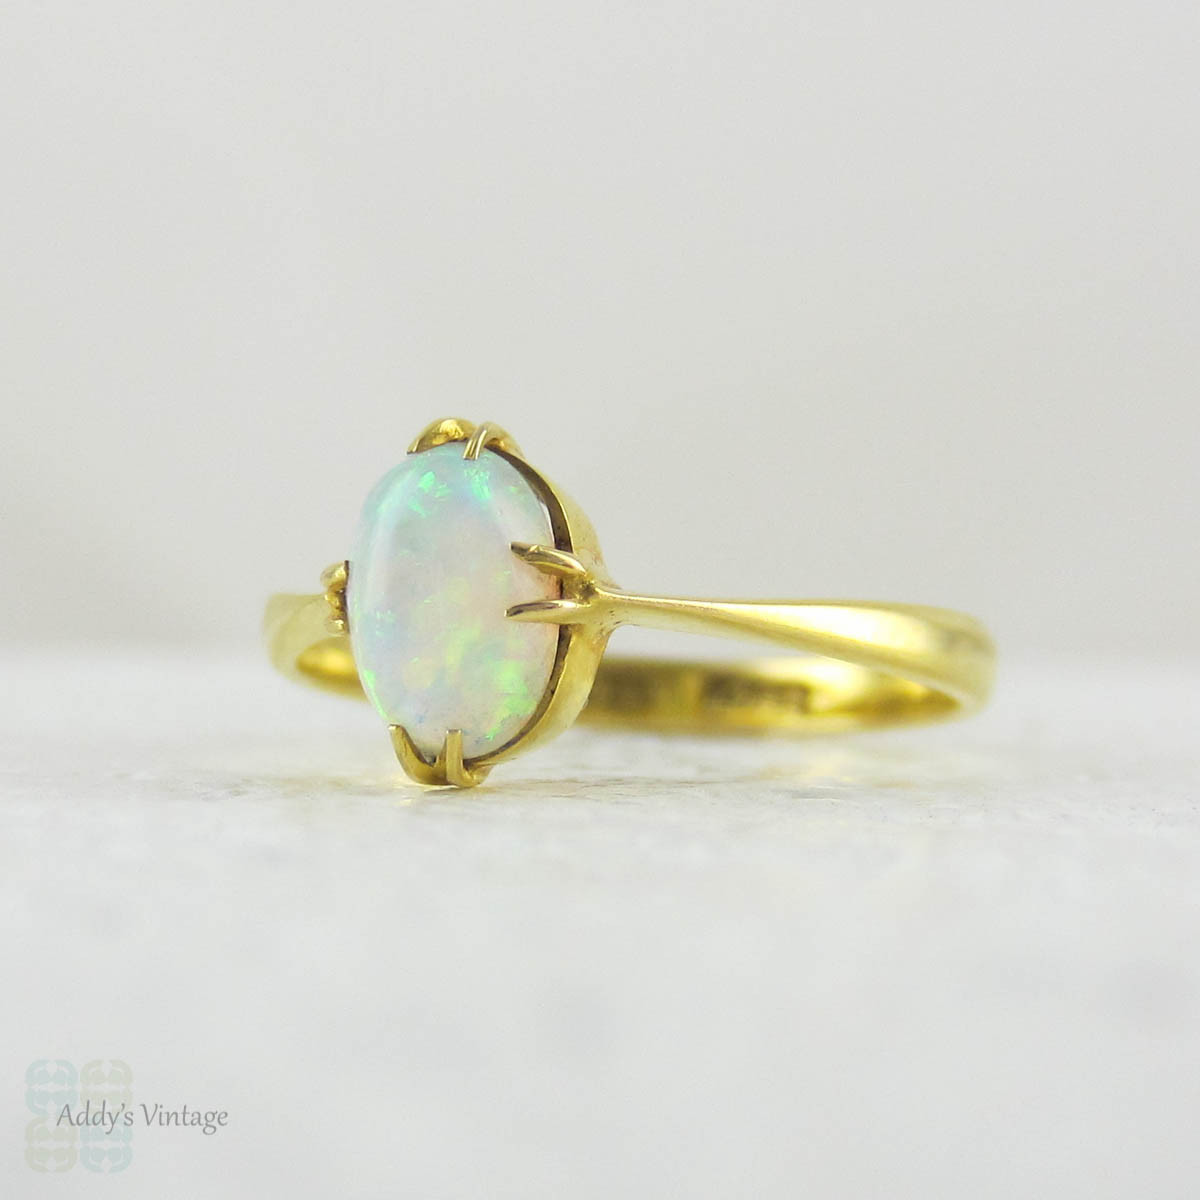 Antique Opal Single Stone Ring in 18 Carat Yellow Gold. Opal Cabochon ...